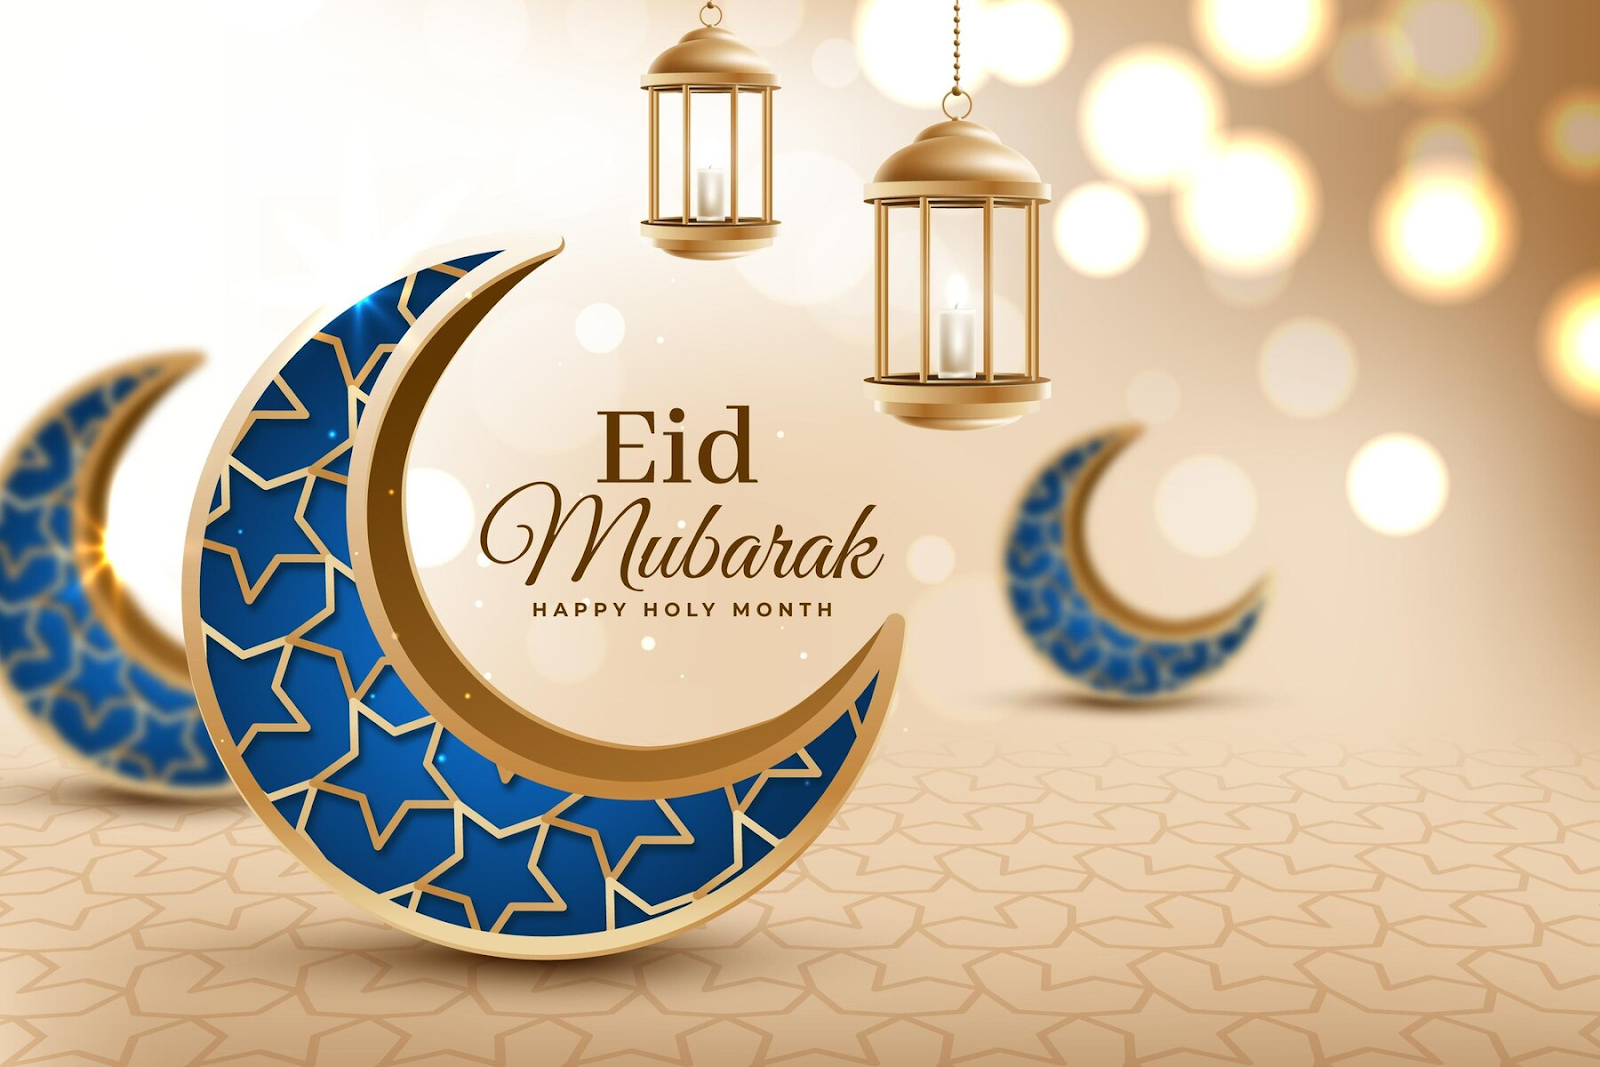 Eid Al Fitr (Dates to be confirmed in March/April)